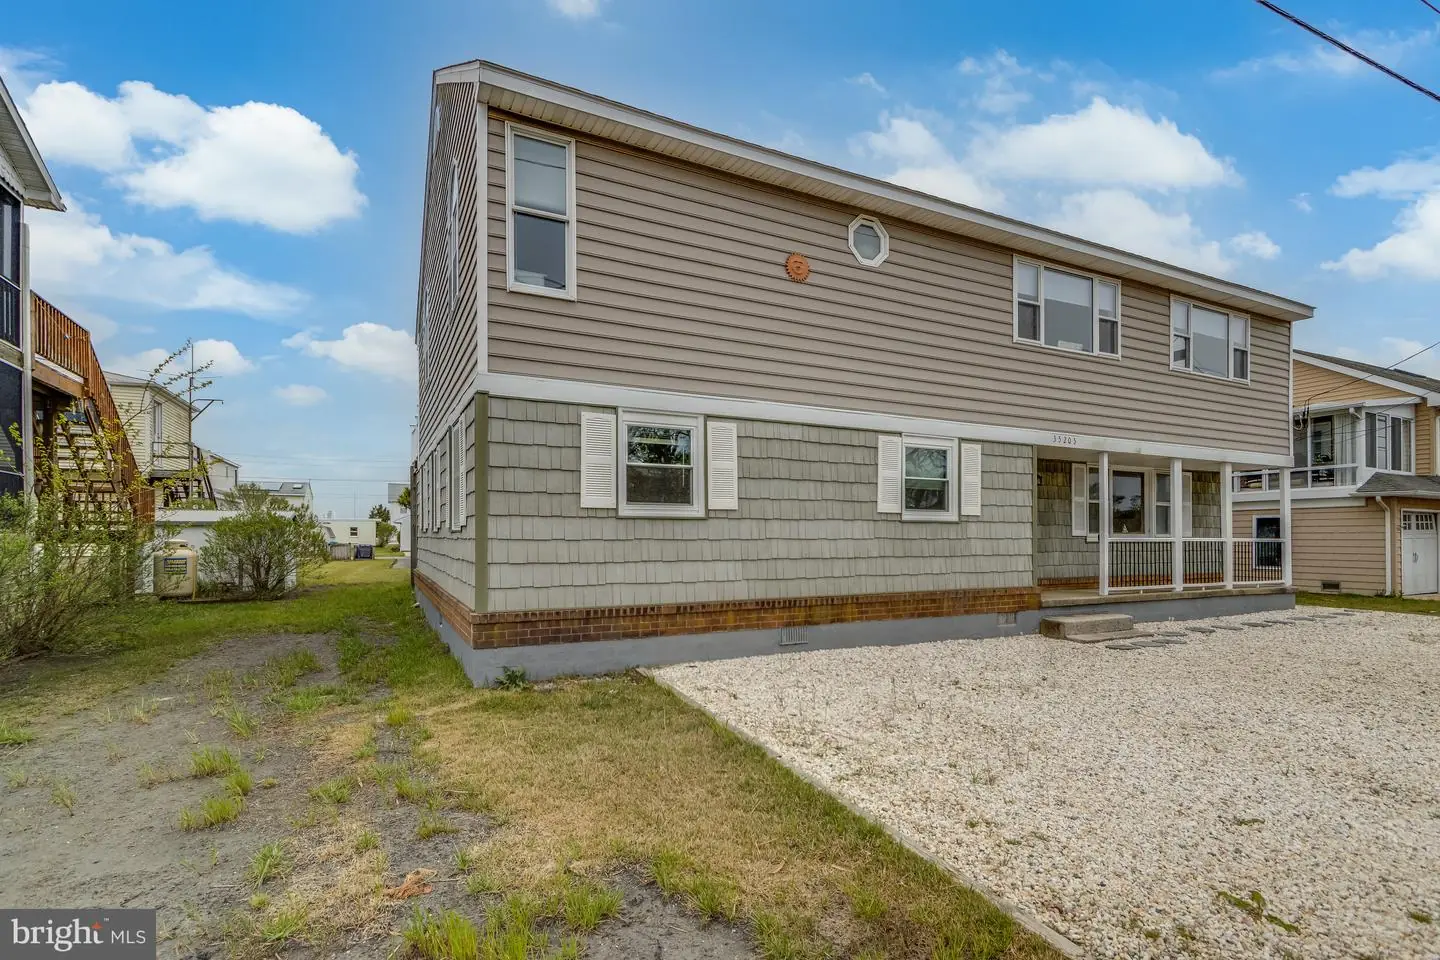 DESU2060190-803009595506-2024-04-21-00-08-06 35205 Hassell Ave | Bethany Beach, DE Real Estate For Sale | MLS# Desu2060190  - 1st Choice Properties